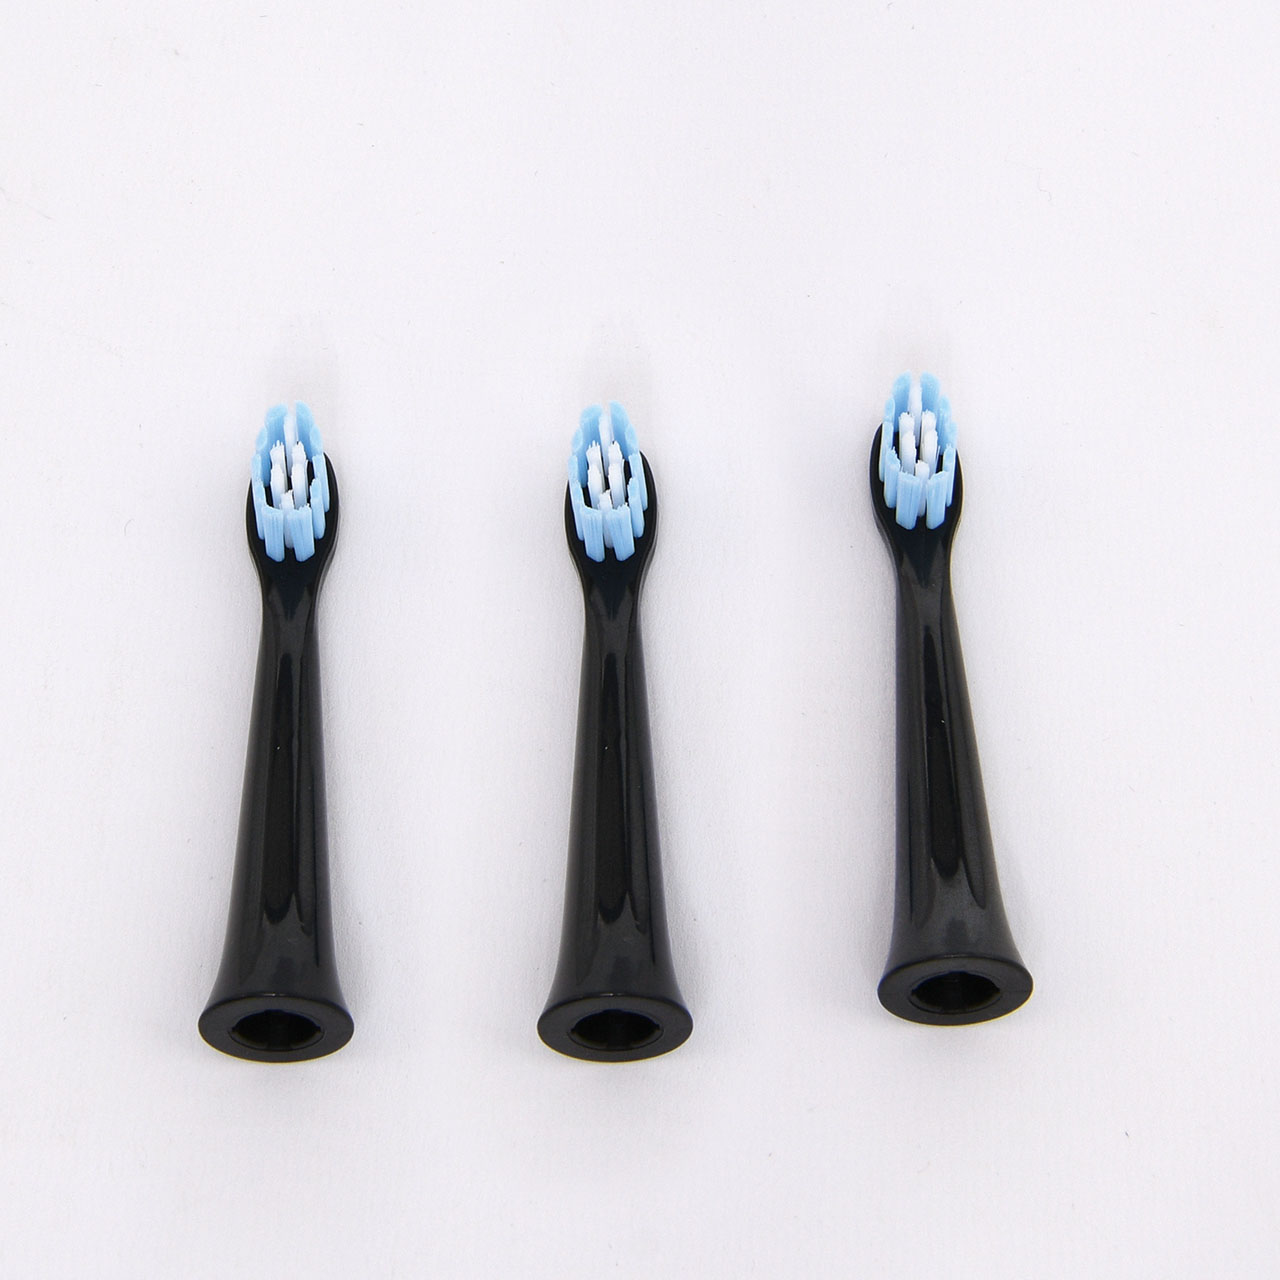 Extra Toothbrush Heads for Rechargeable Sonic Toothbrush - Pack of 3